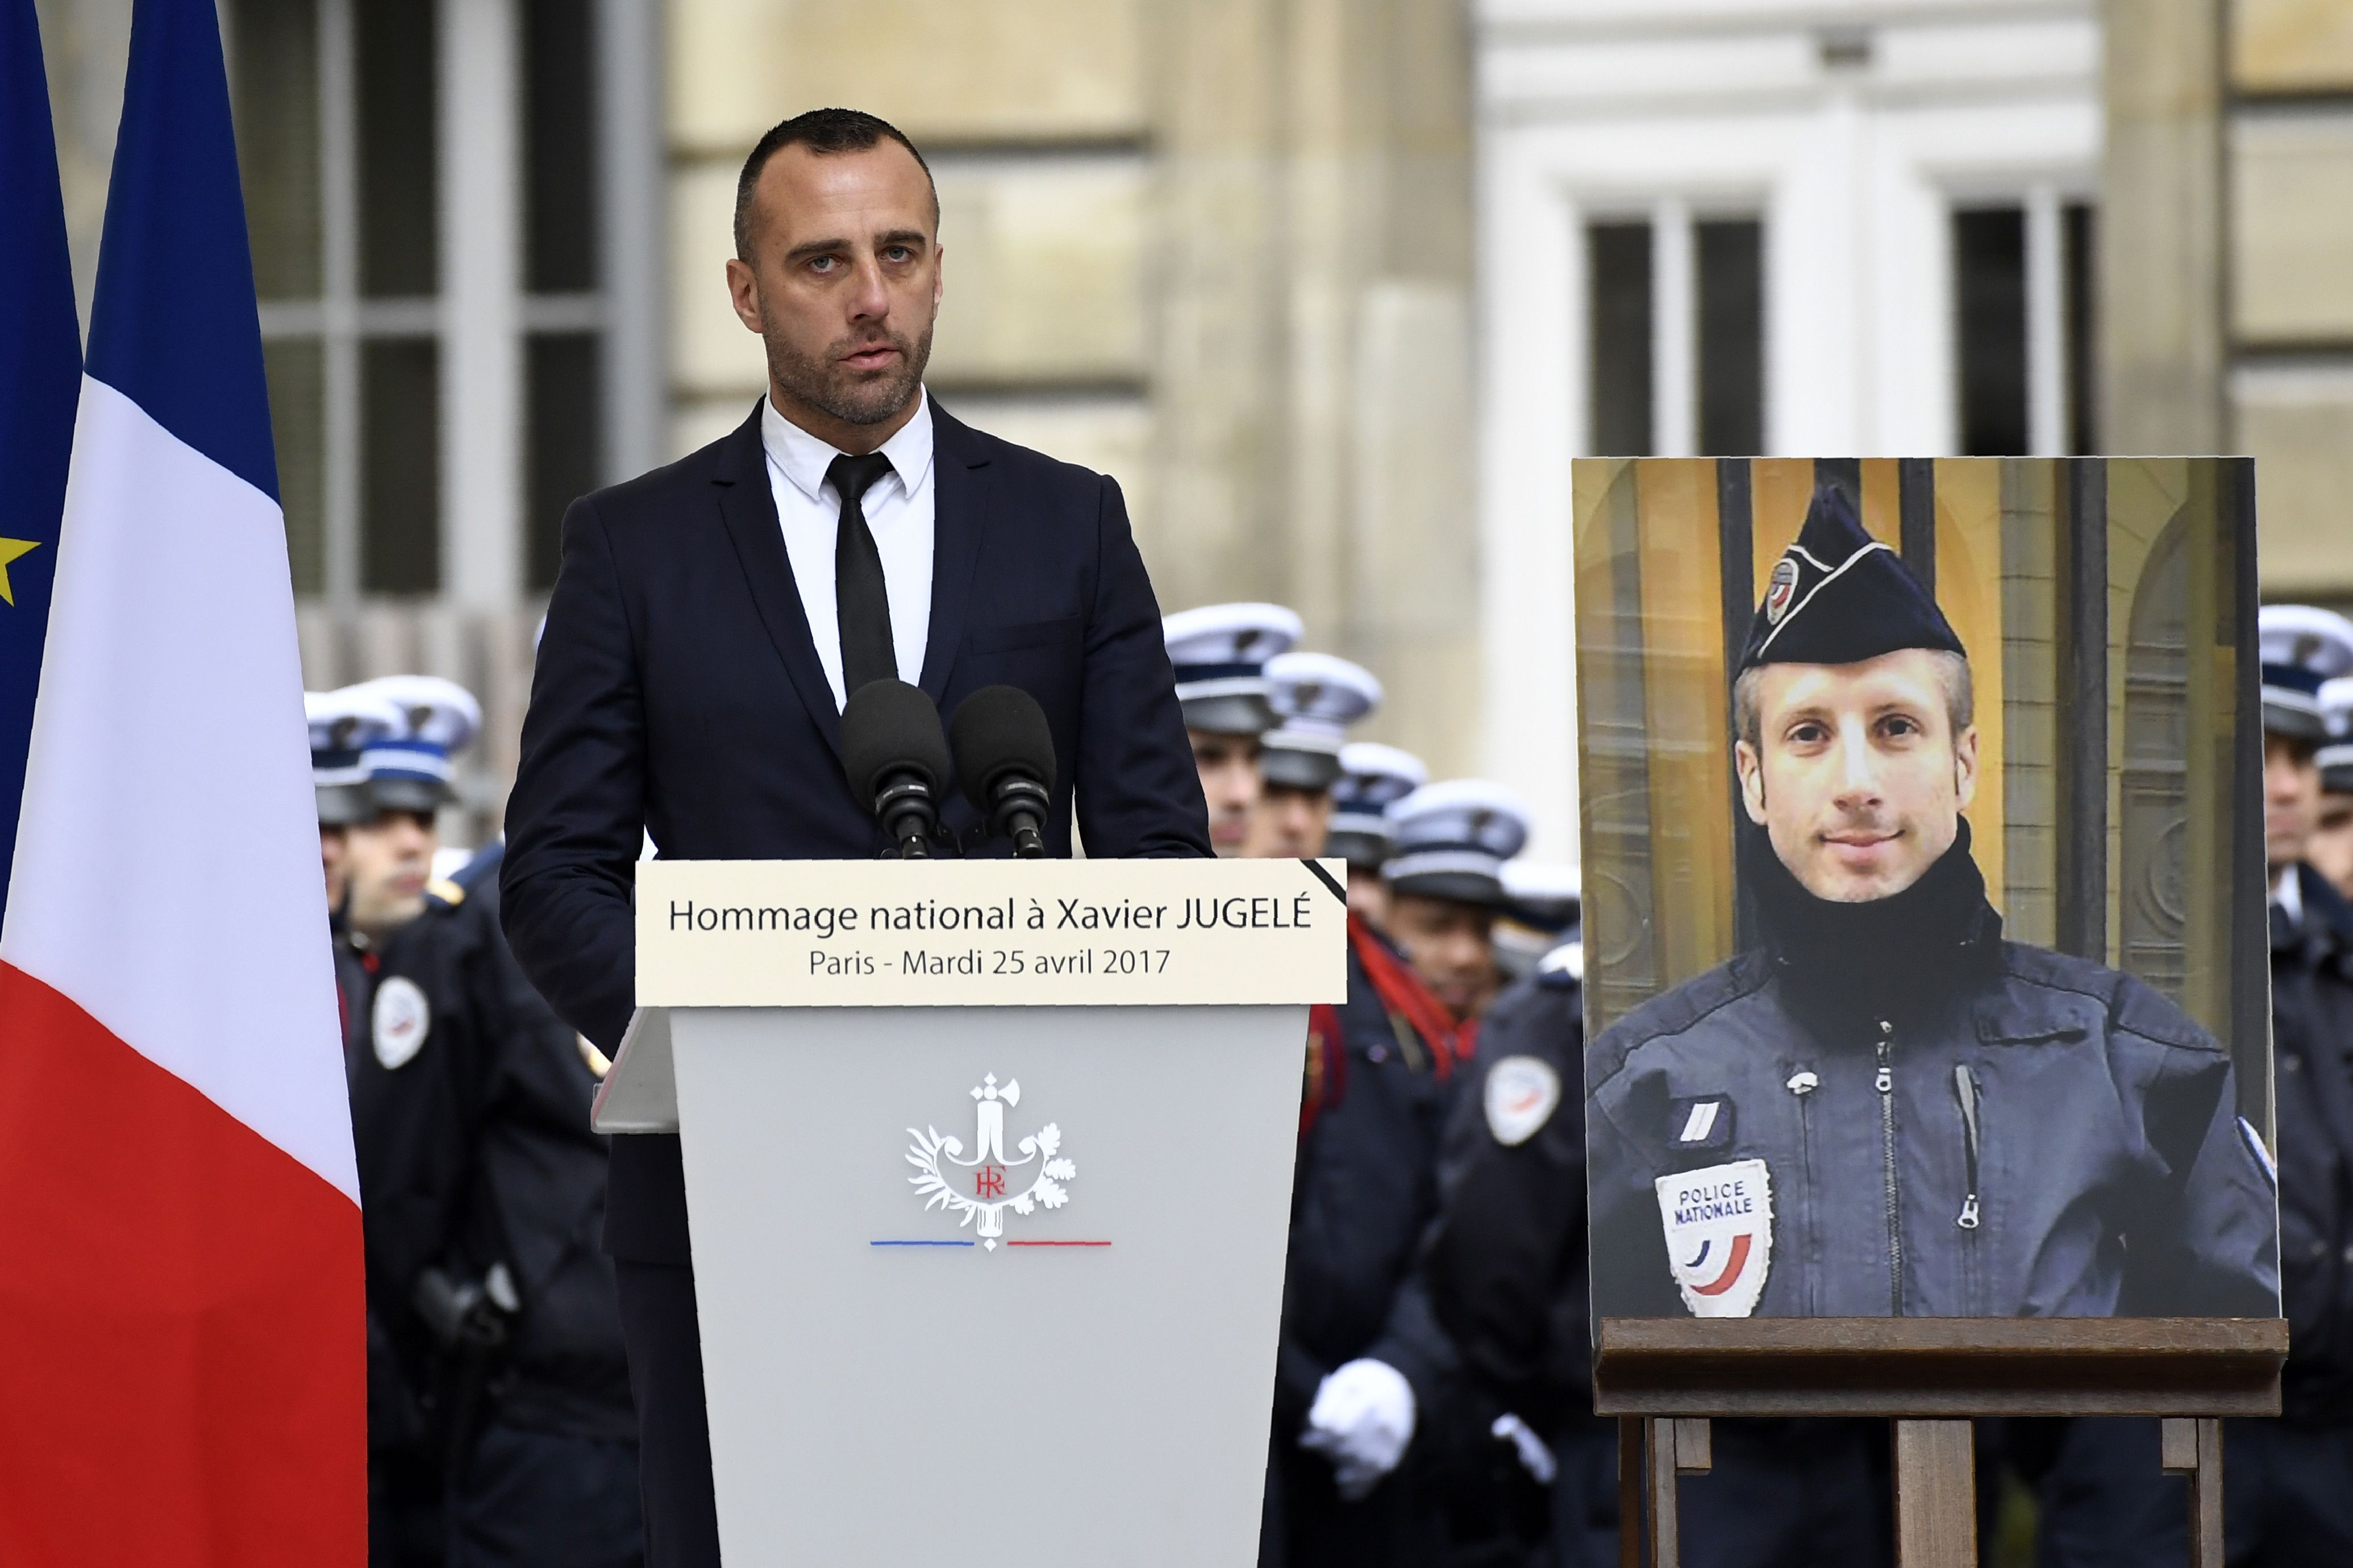 Etienne Cardiles, the partner of Xavier Jugele, the policeman (portrait) killed by a jihadist in an attack on the Champs Elysees, gives a speech during a ceremony to pay tribute to him on April 25, 2017 at the Paris prefecture building. (BERTRAND GUAY&mdash;AFP/Getty Images)